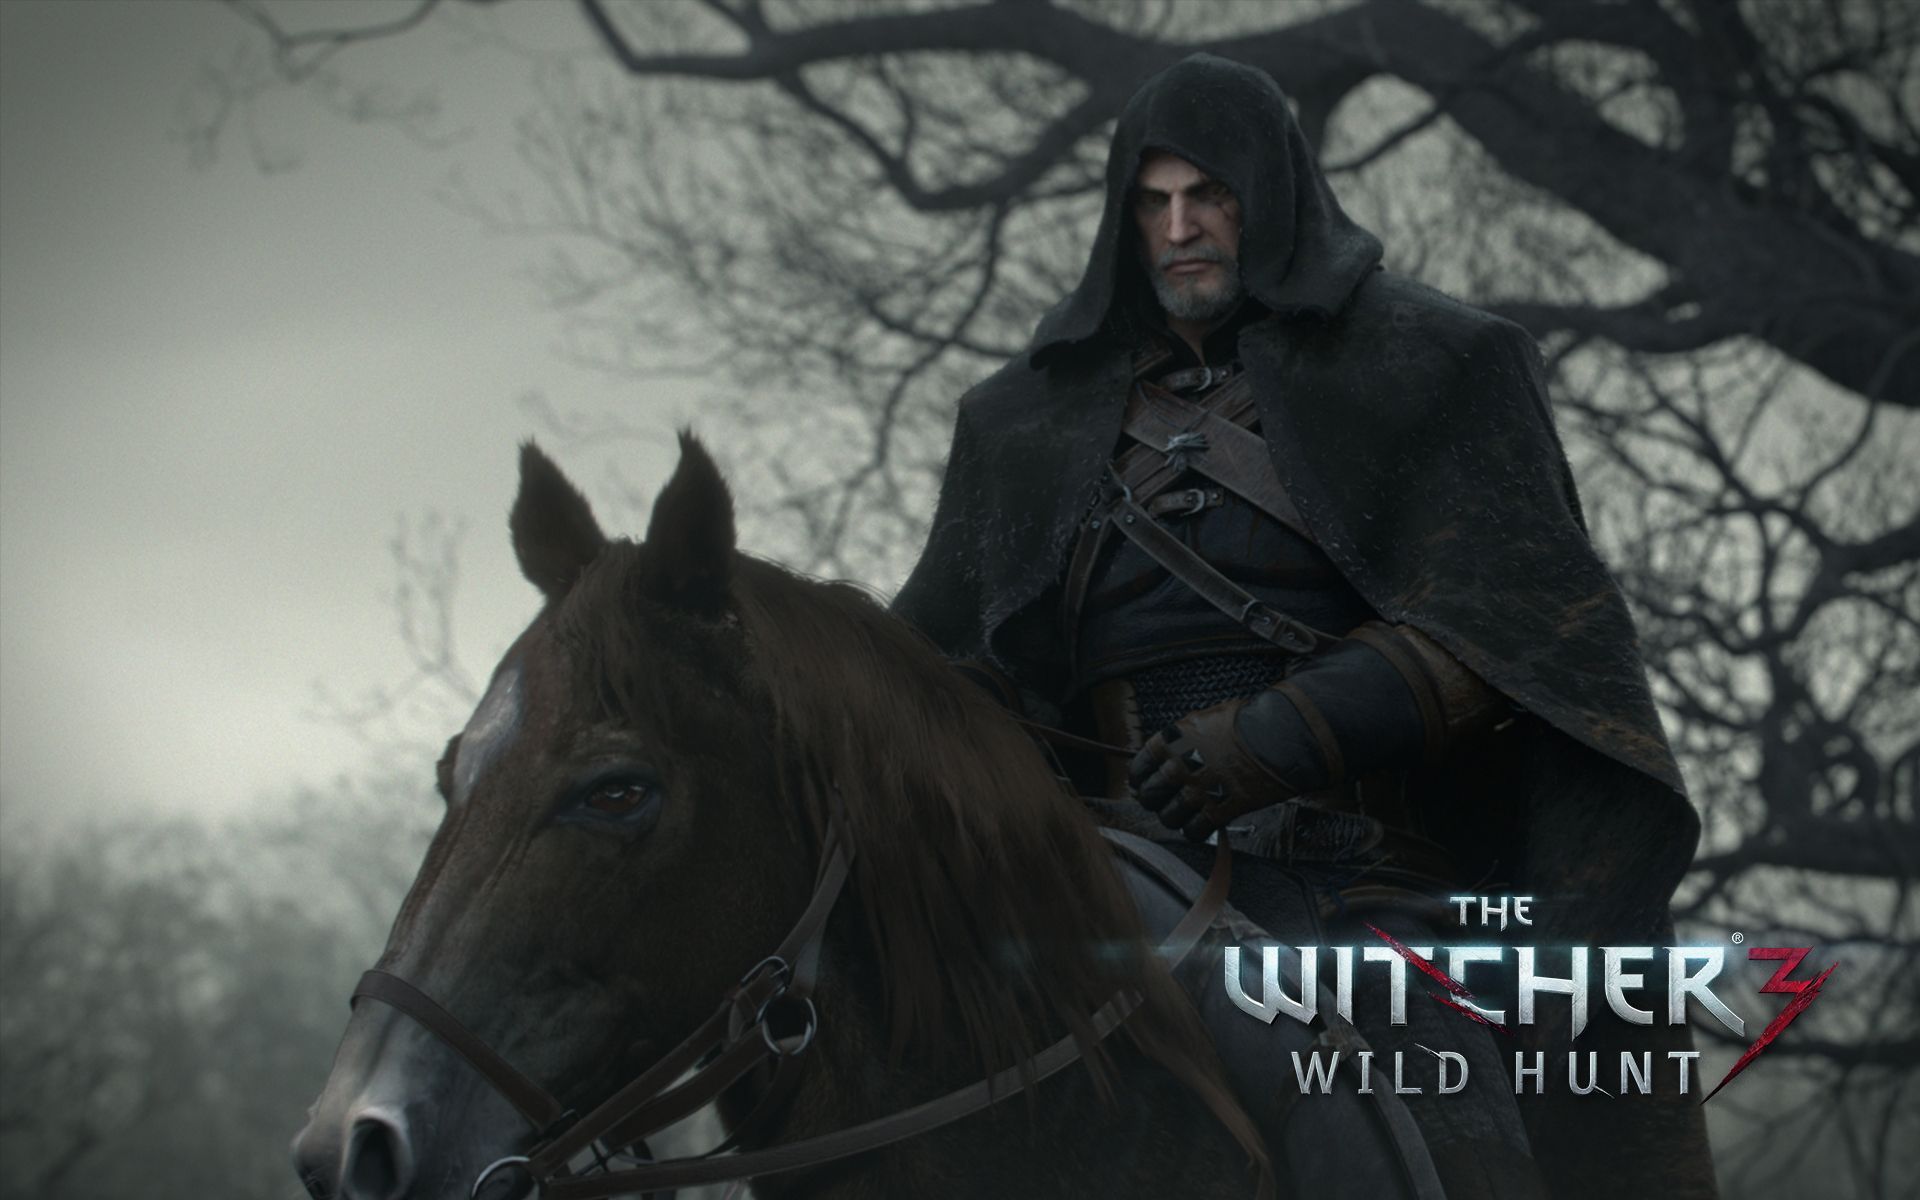 Witcher 3 New wallpaper, videos and hidden messages - The Witcher